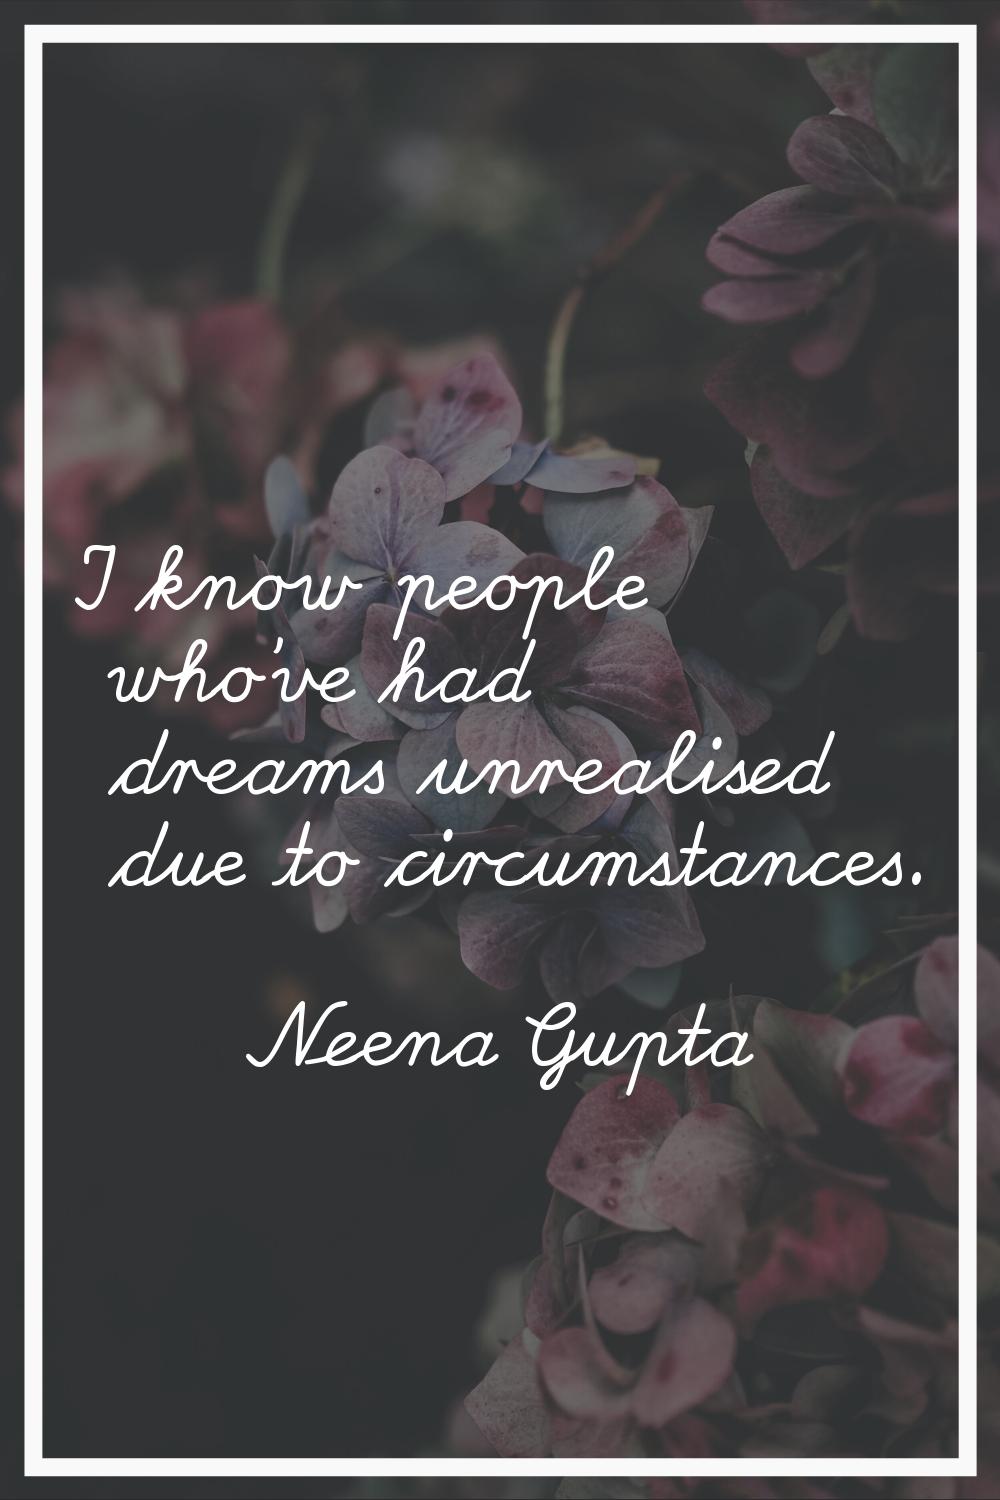 I know people who've had dreams unrealised due to circumstances.